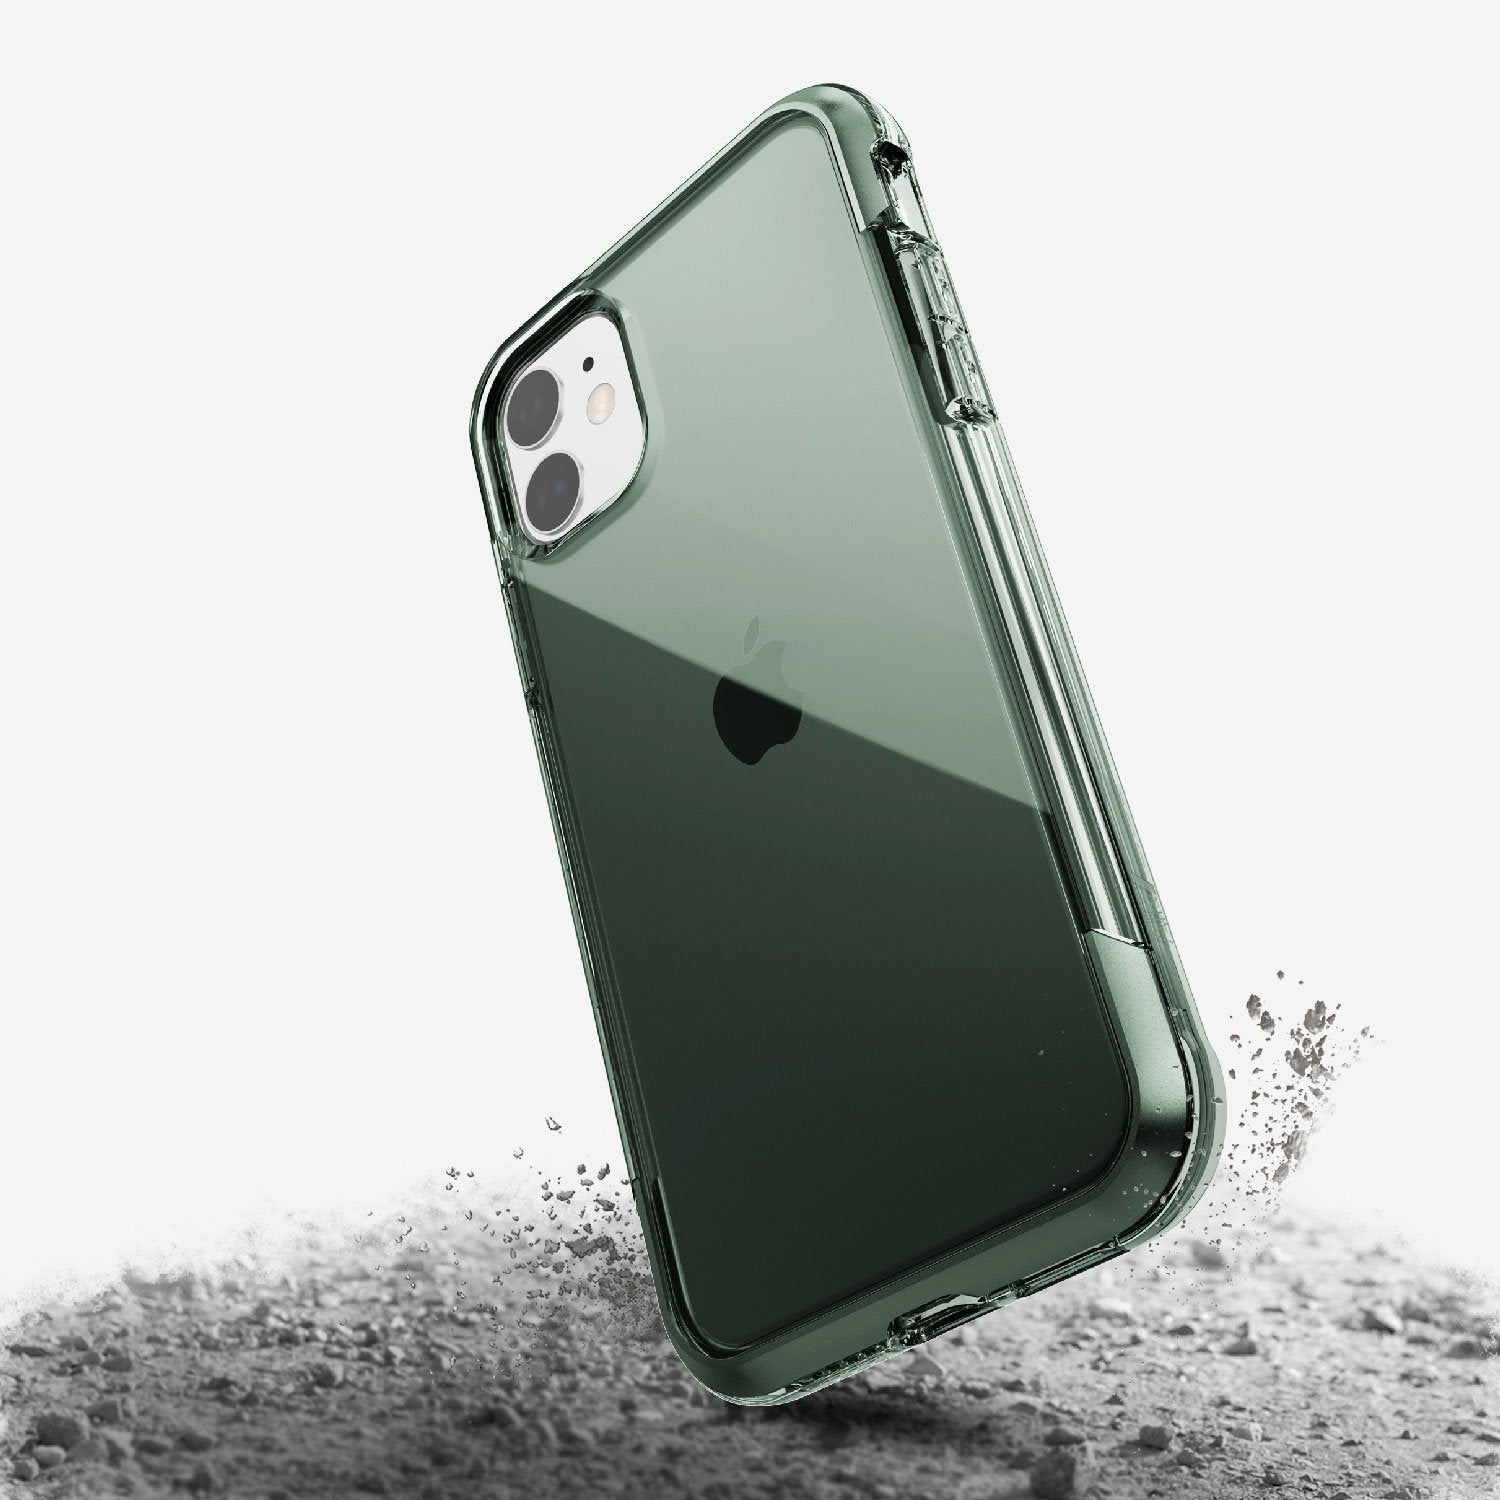 A Raptic iPhone 11 Pro case in green with wireless charging capability.